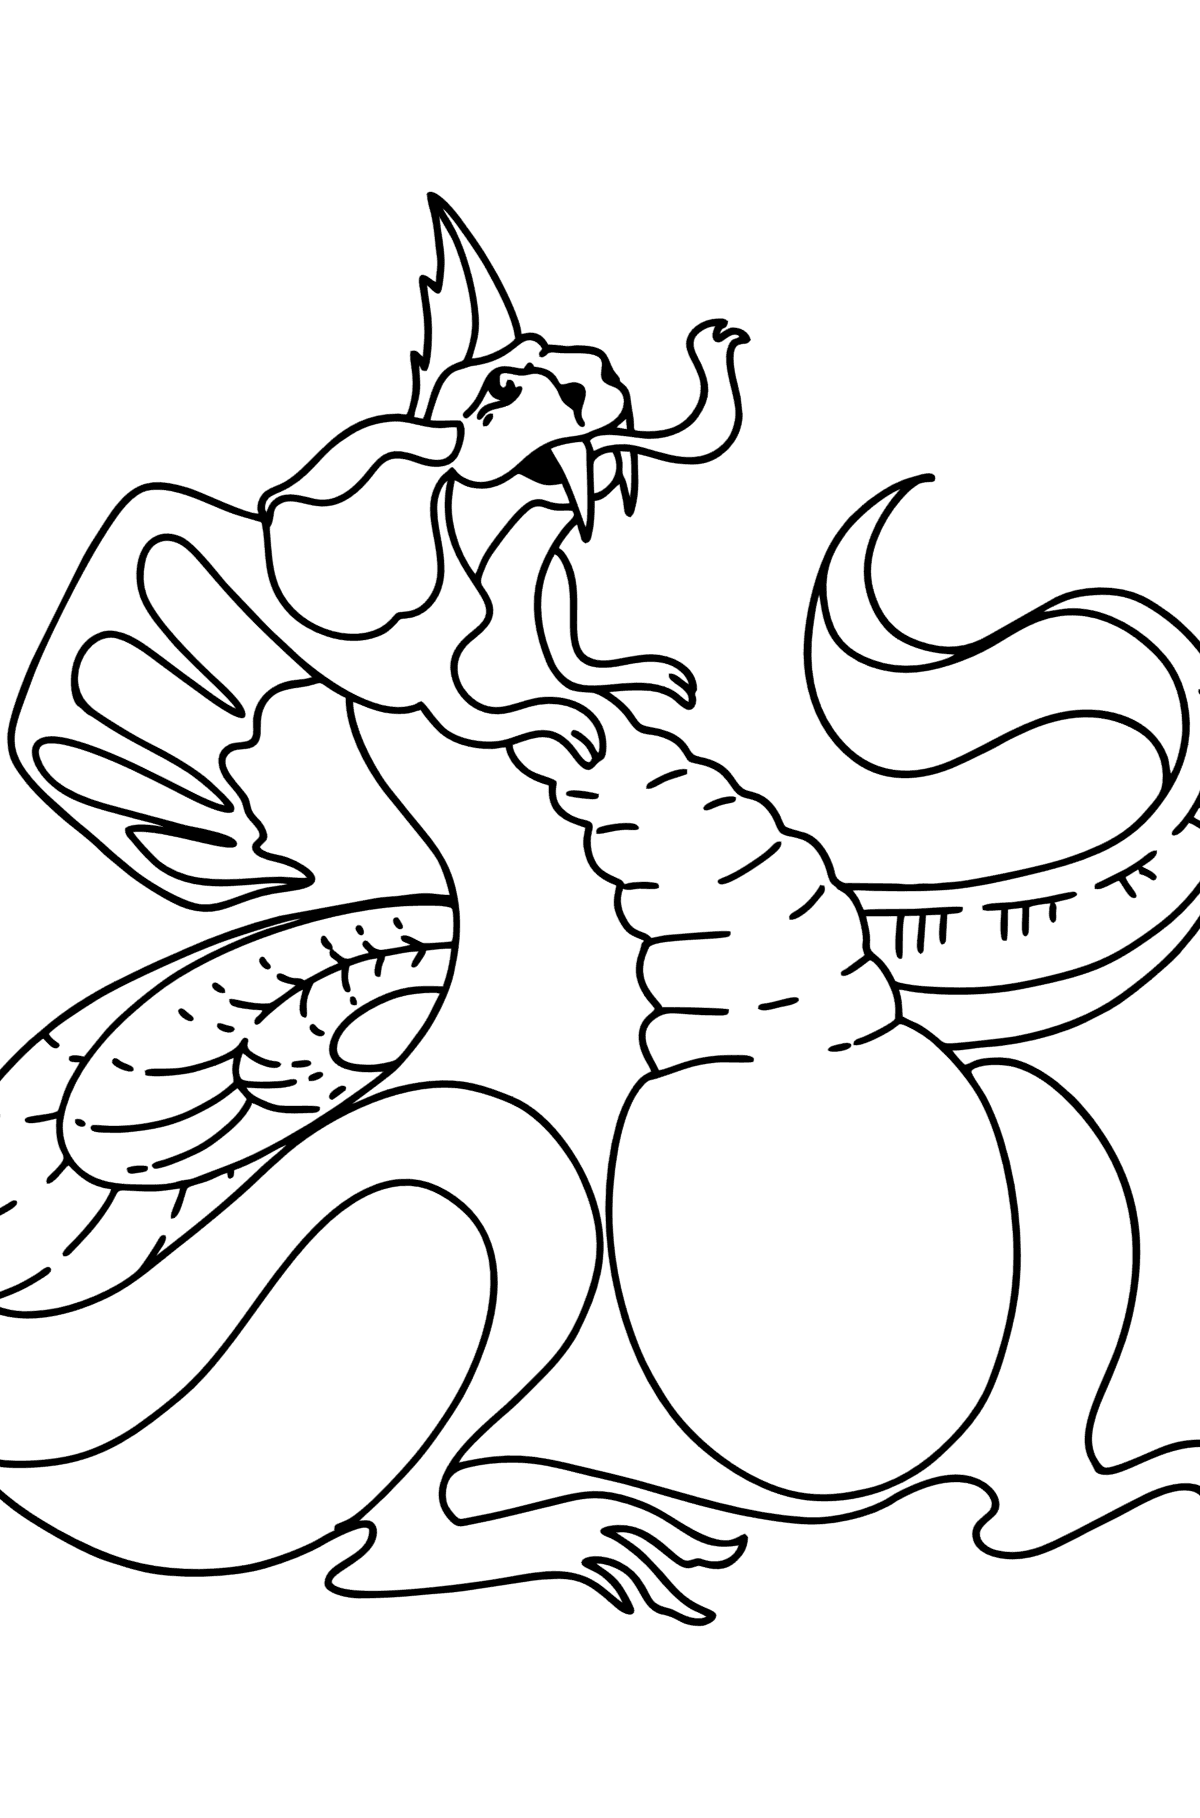 Tired Dragon coloring page - Coloring Pages for Kids